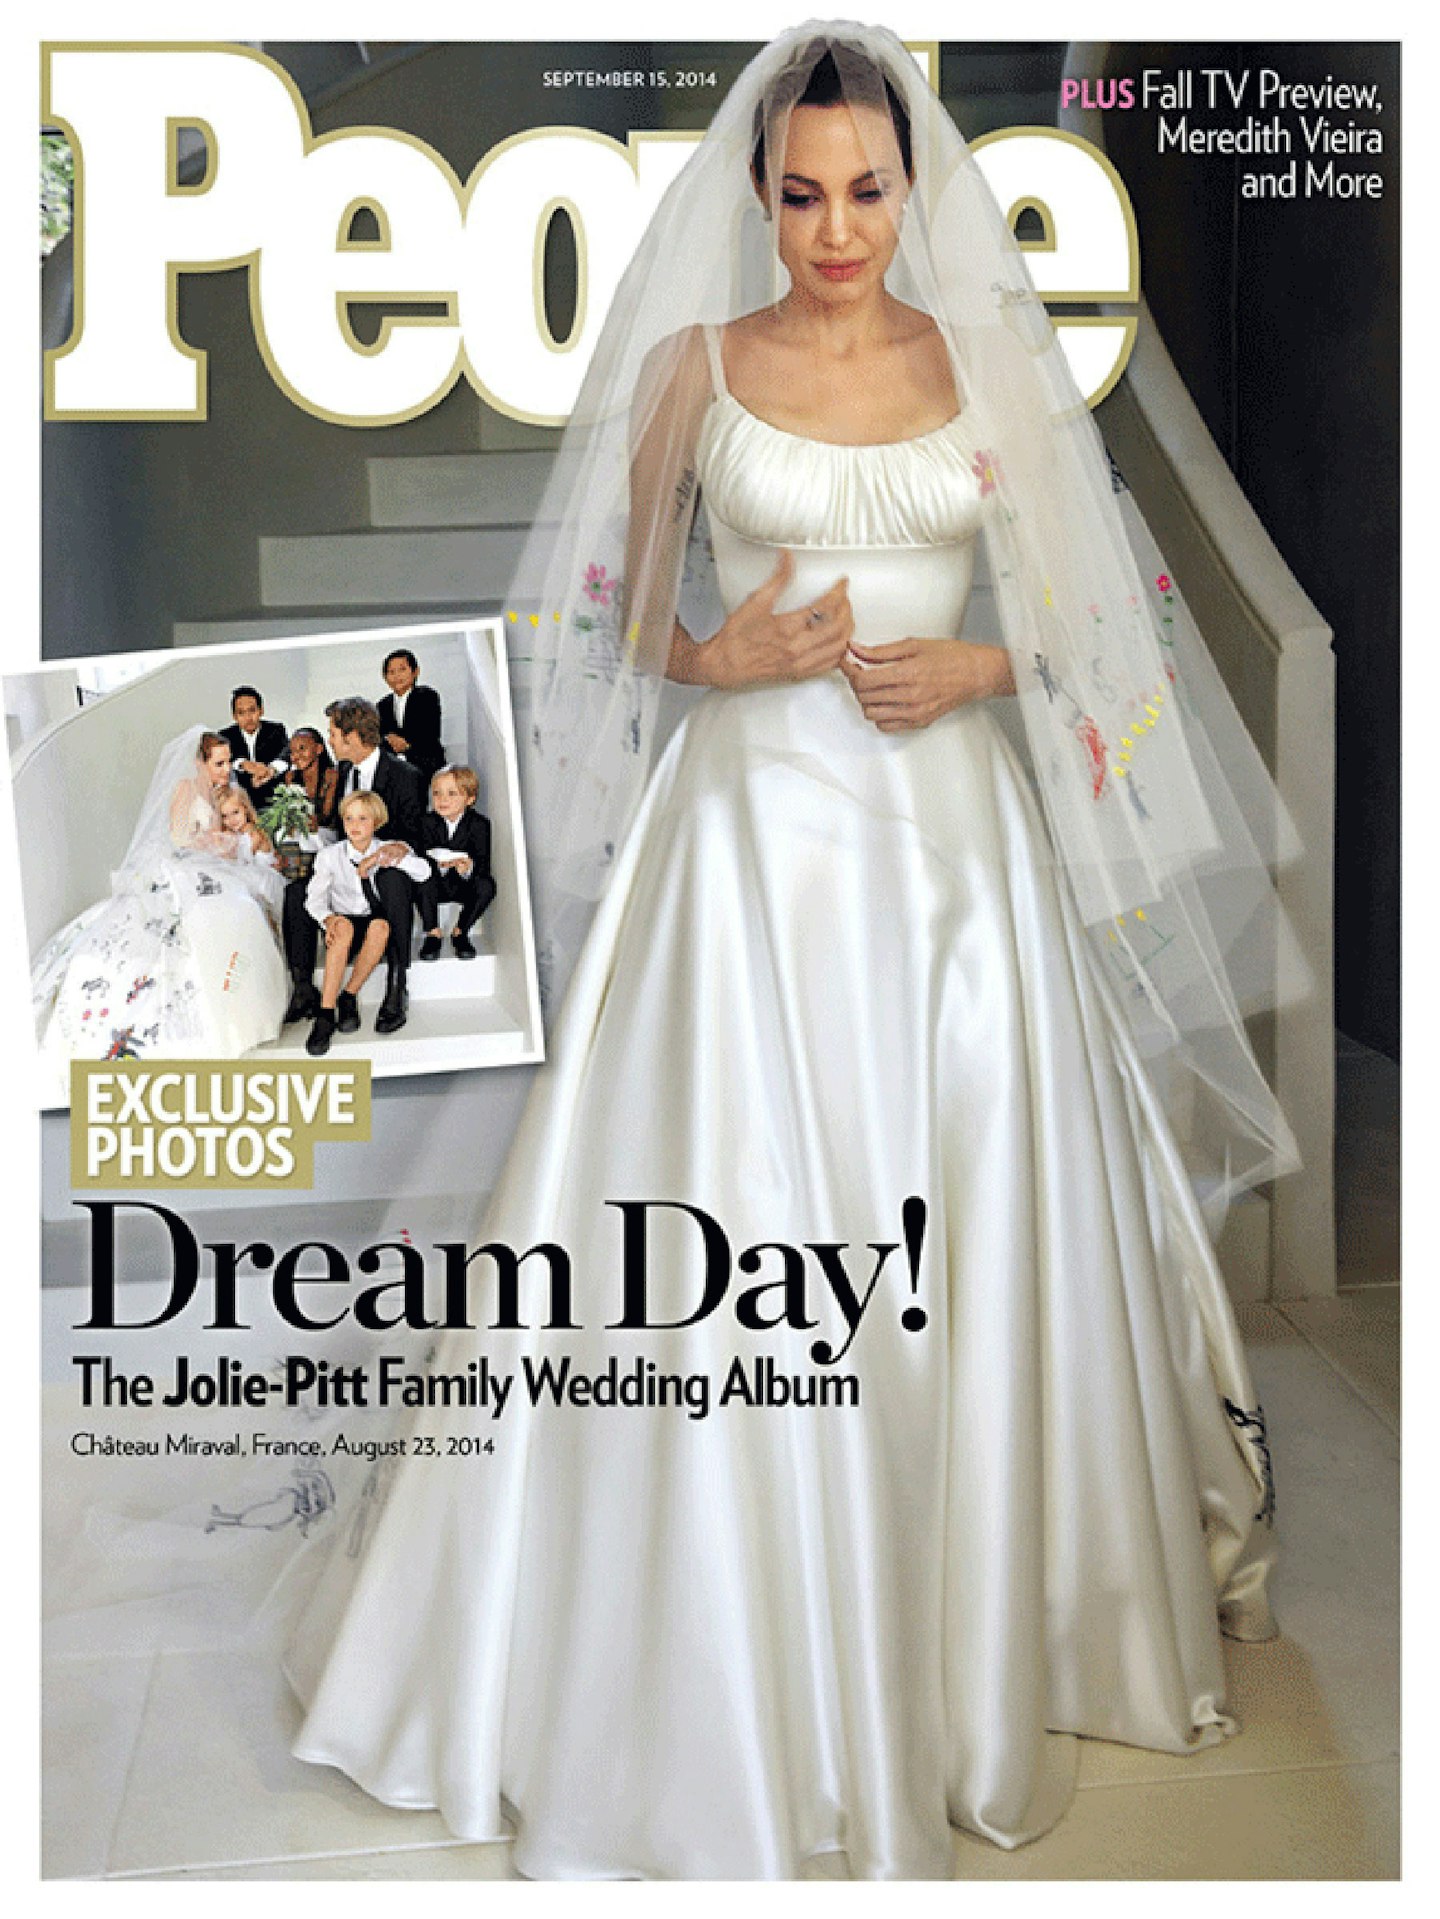 Angelina in Versace wedding gown on the cover of People